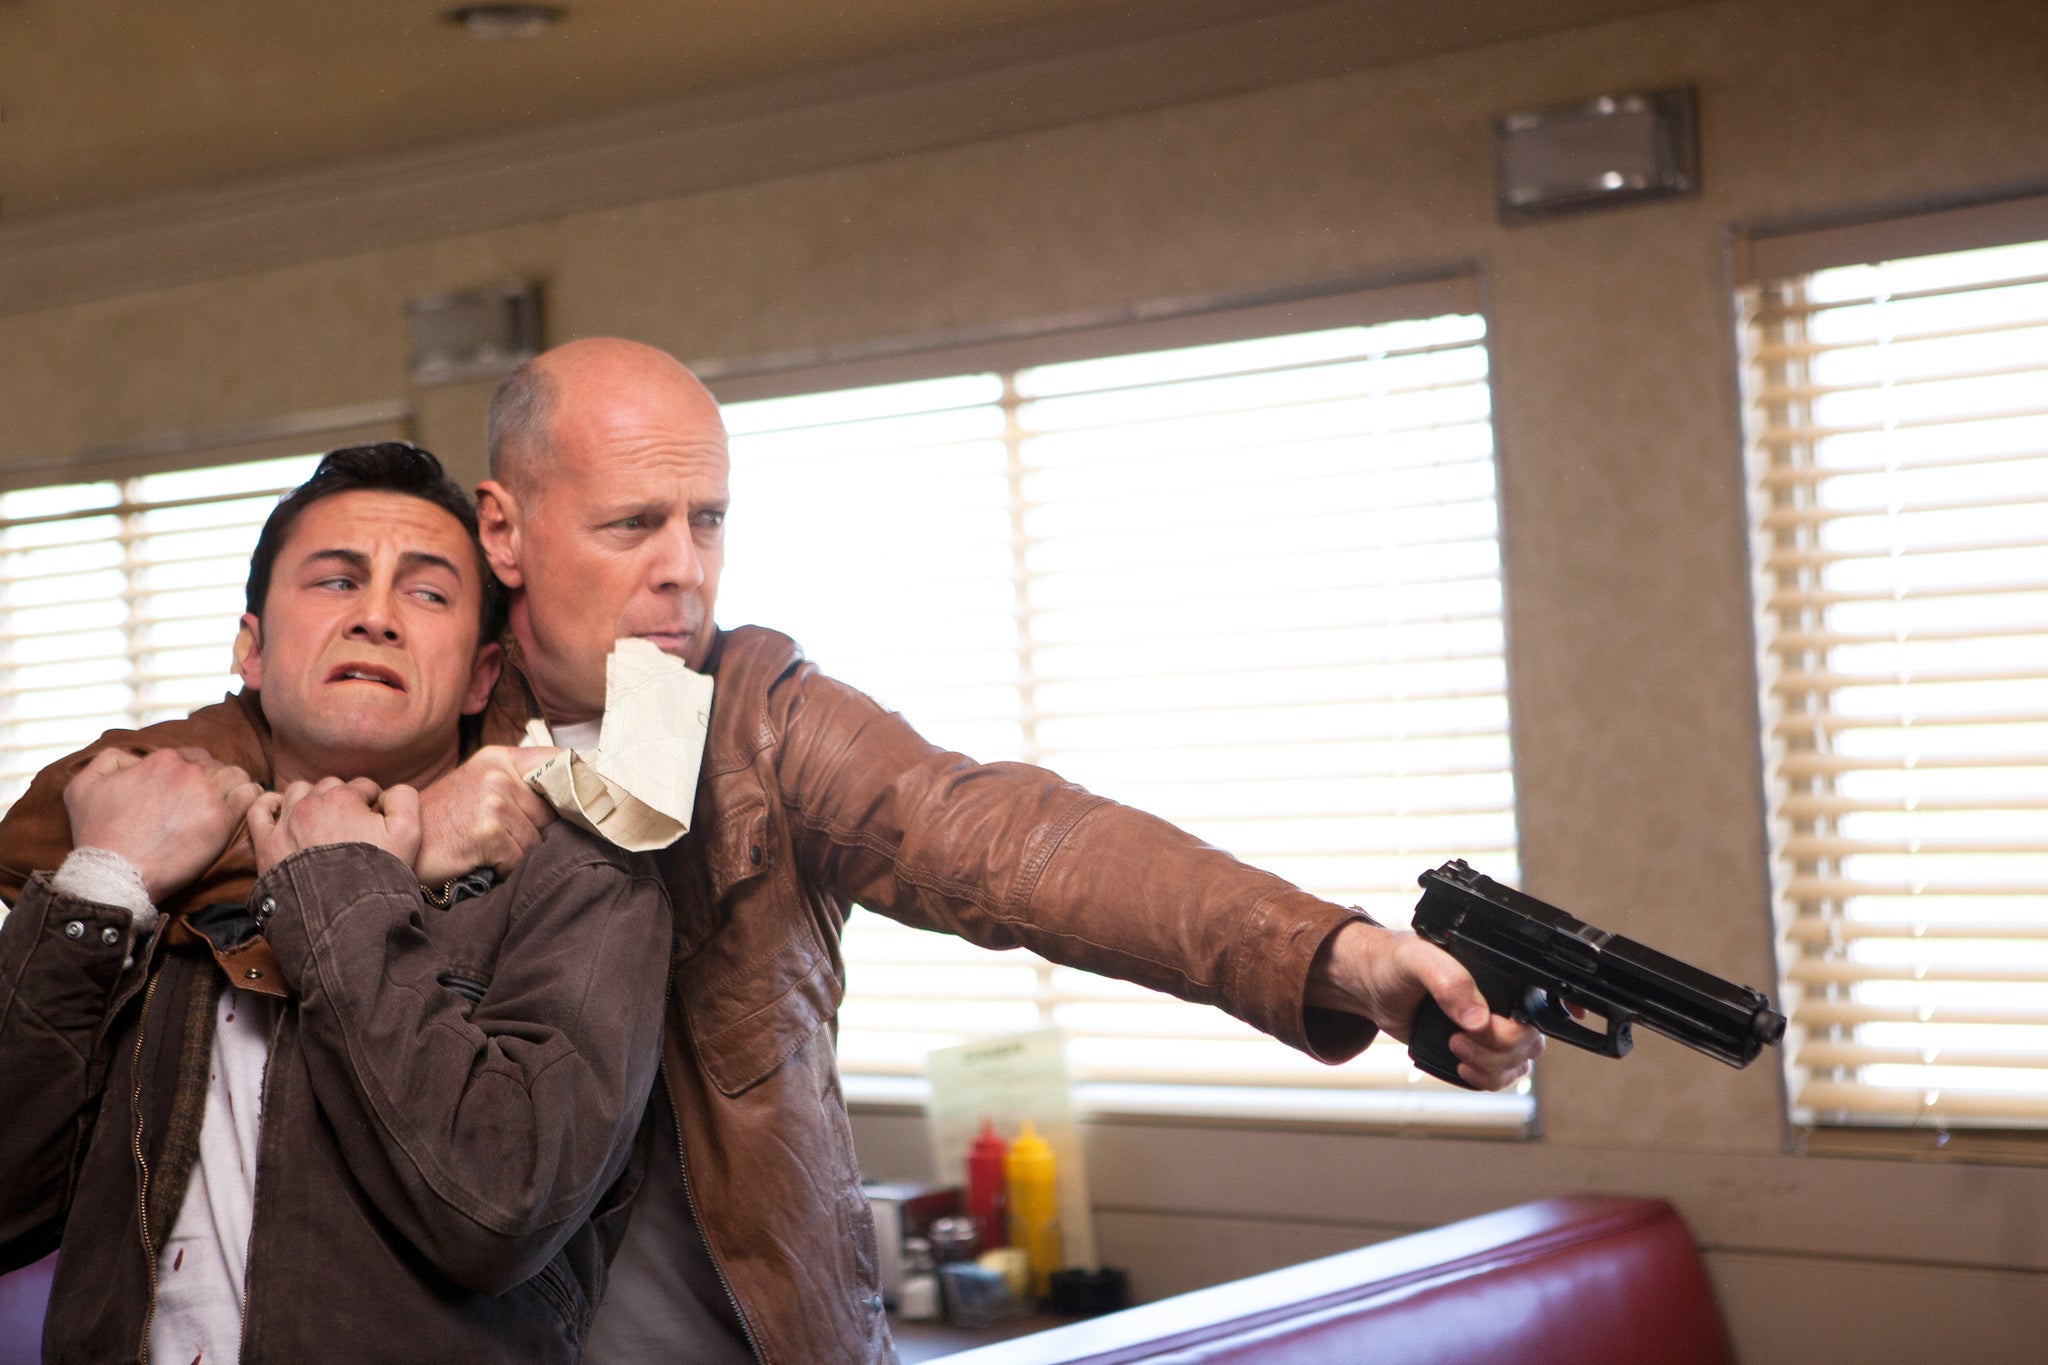 A man in a diner holds another man hostage in a chokehold while he points a gun at someone off camera. 